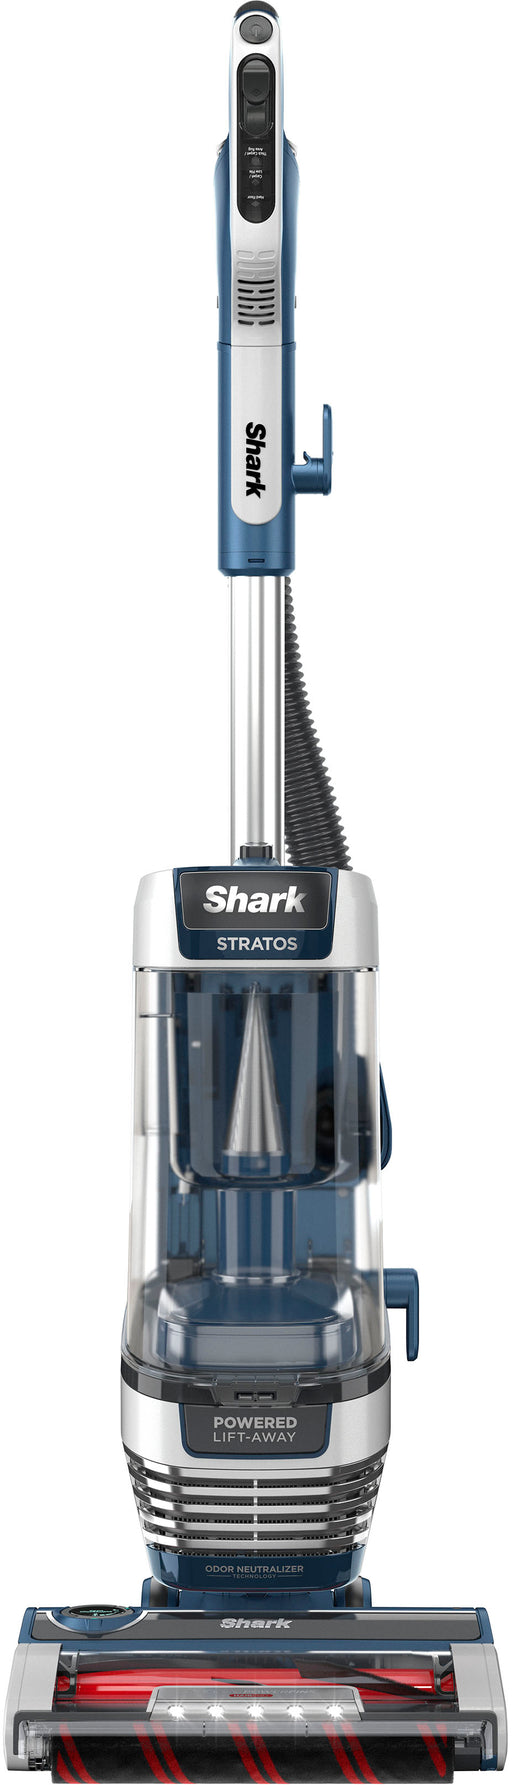 Shark - Stratos Upright Vacuum with DuoClean PowerFins HairPro Self-Cleaning Brushroll Odor Neutralizer Technology - Navy